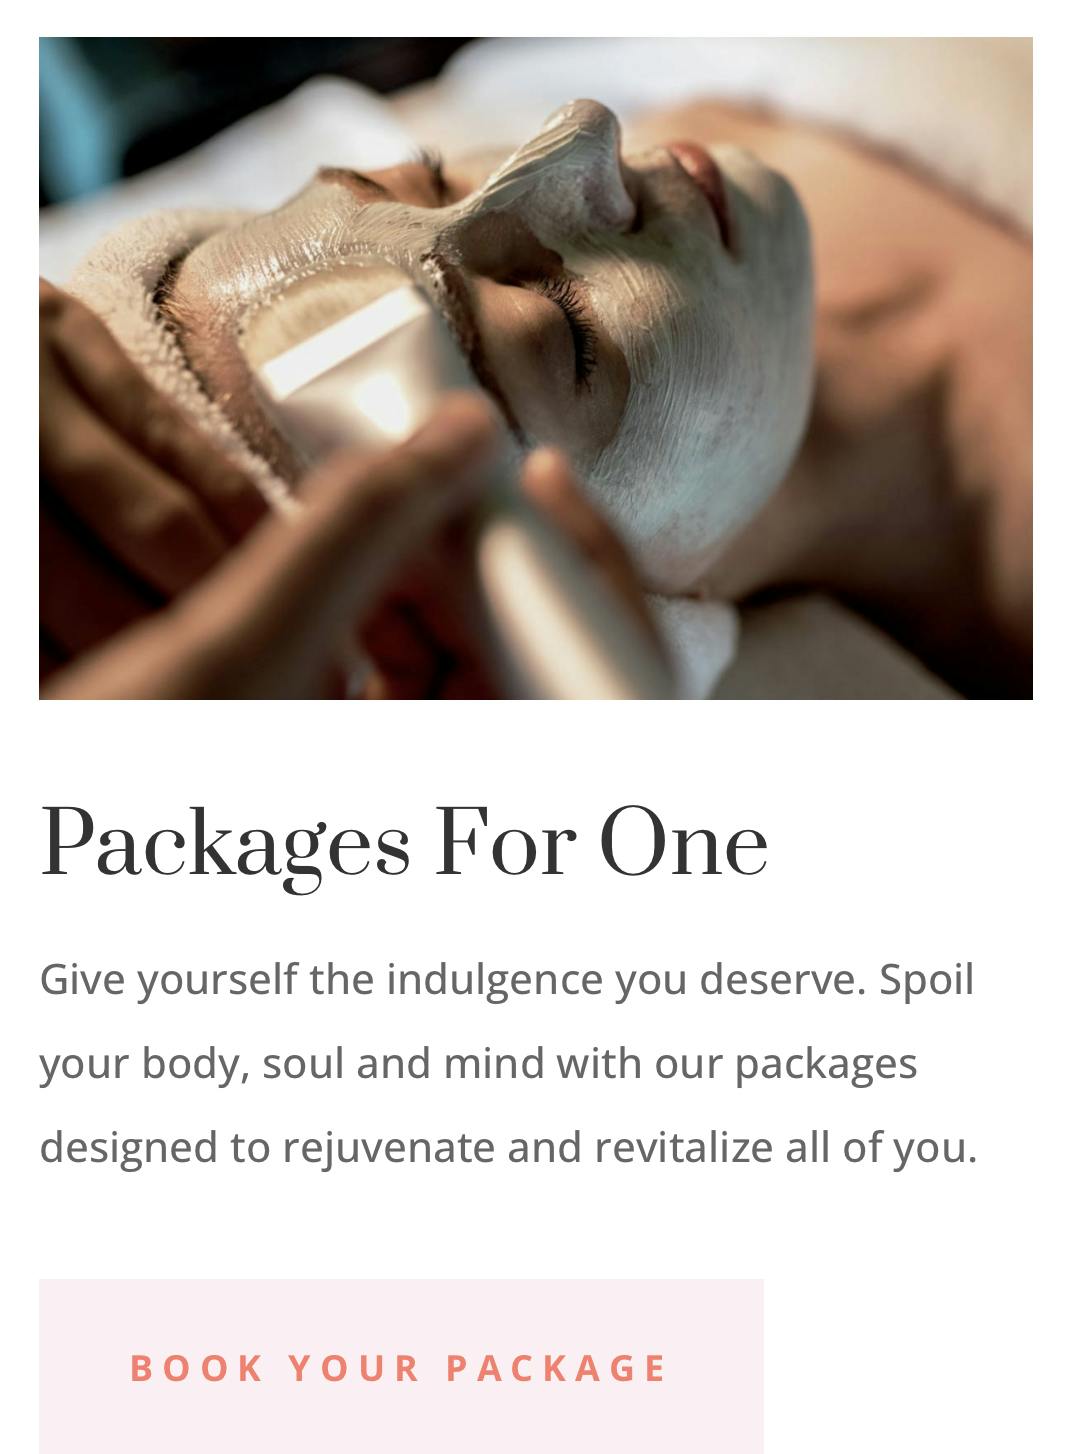 Pick from our Spa menu and get pampered in your room or on your deck by our professional masseuse and beauty therapists